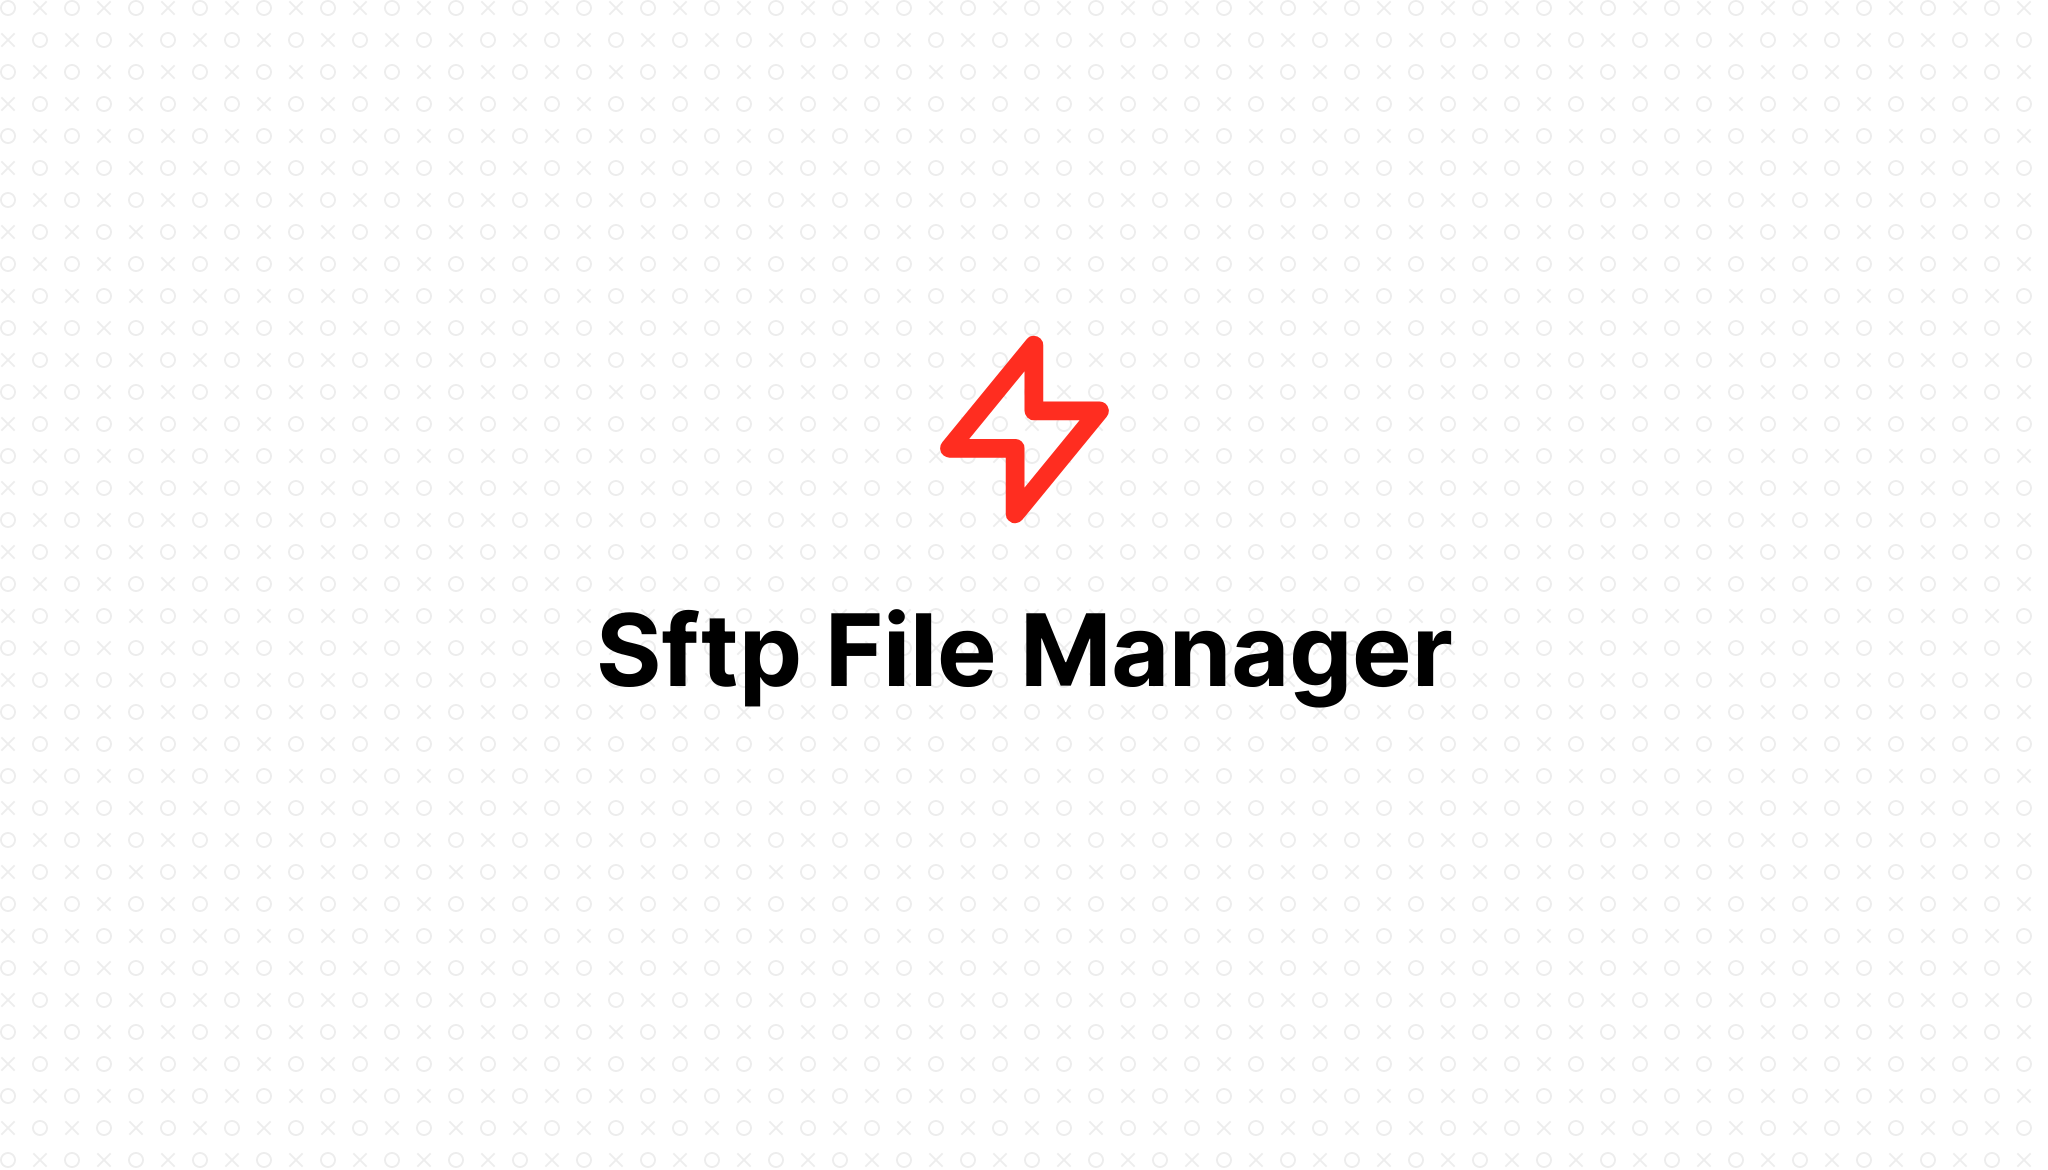 Sftp File Manager